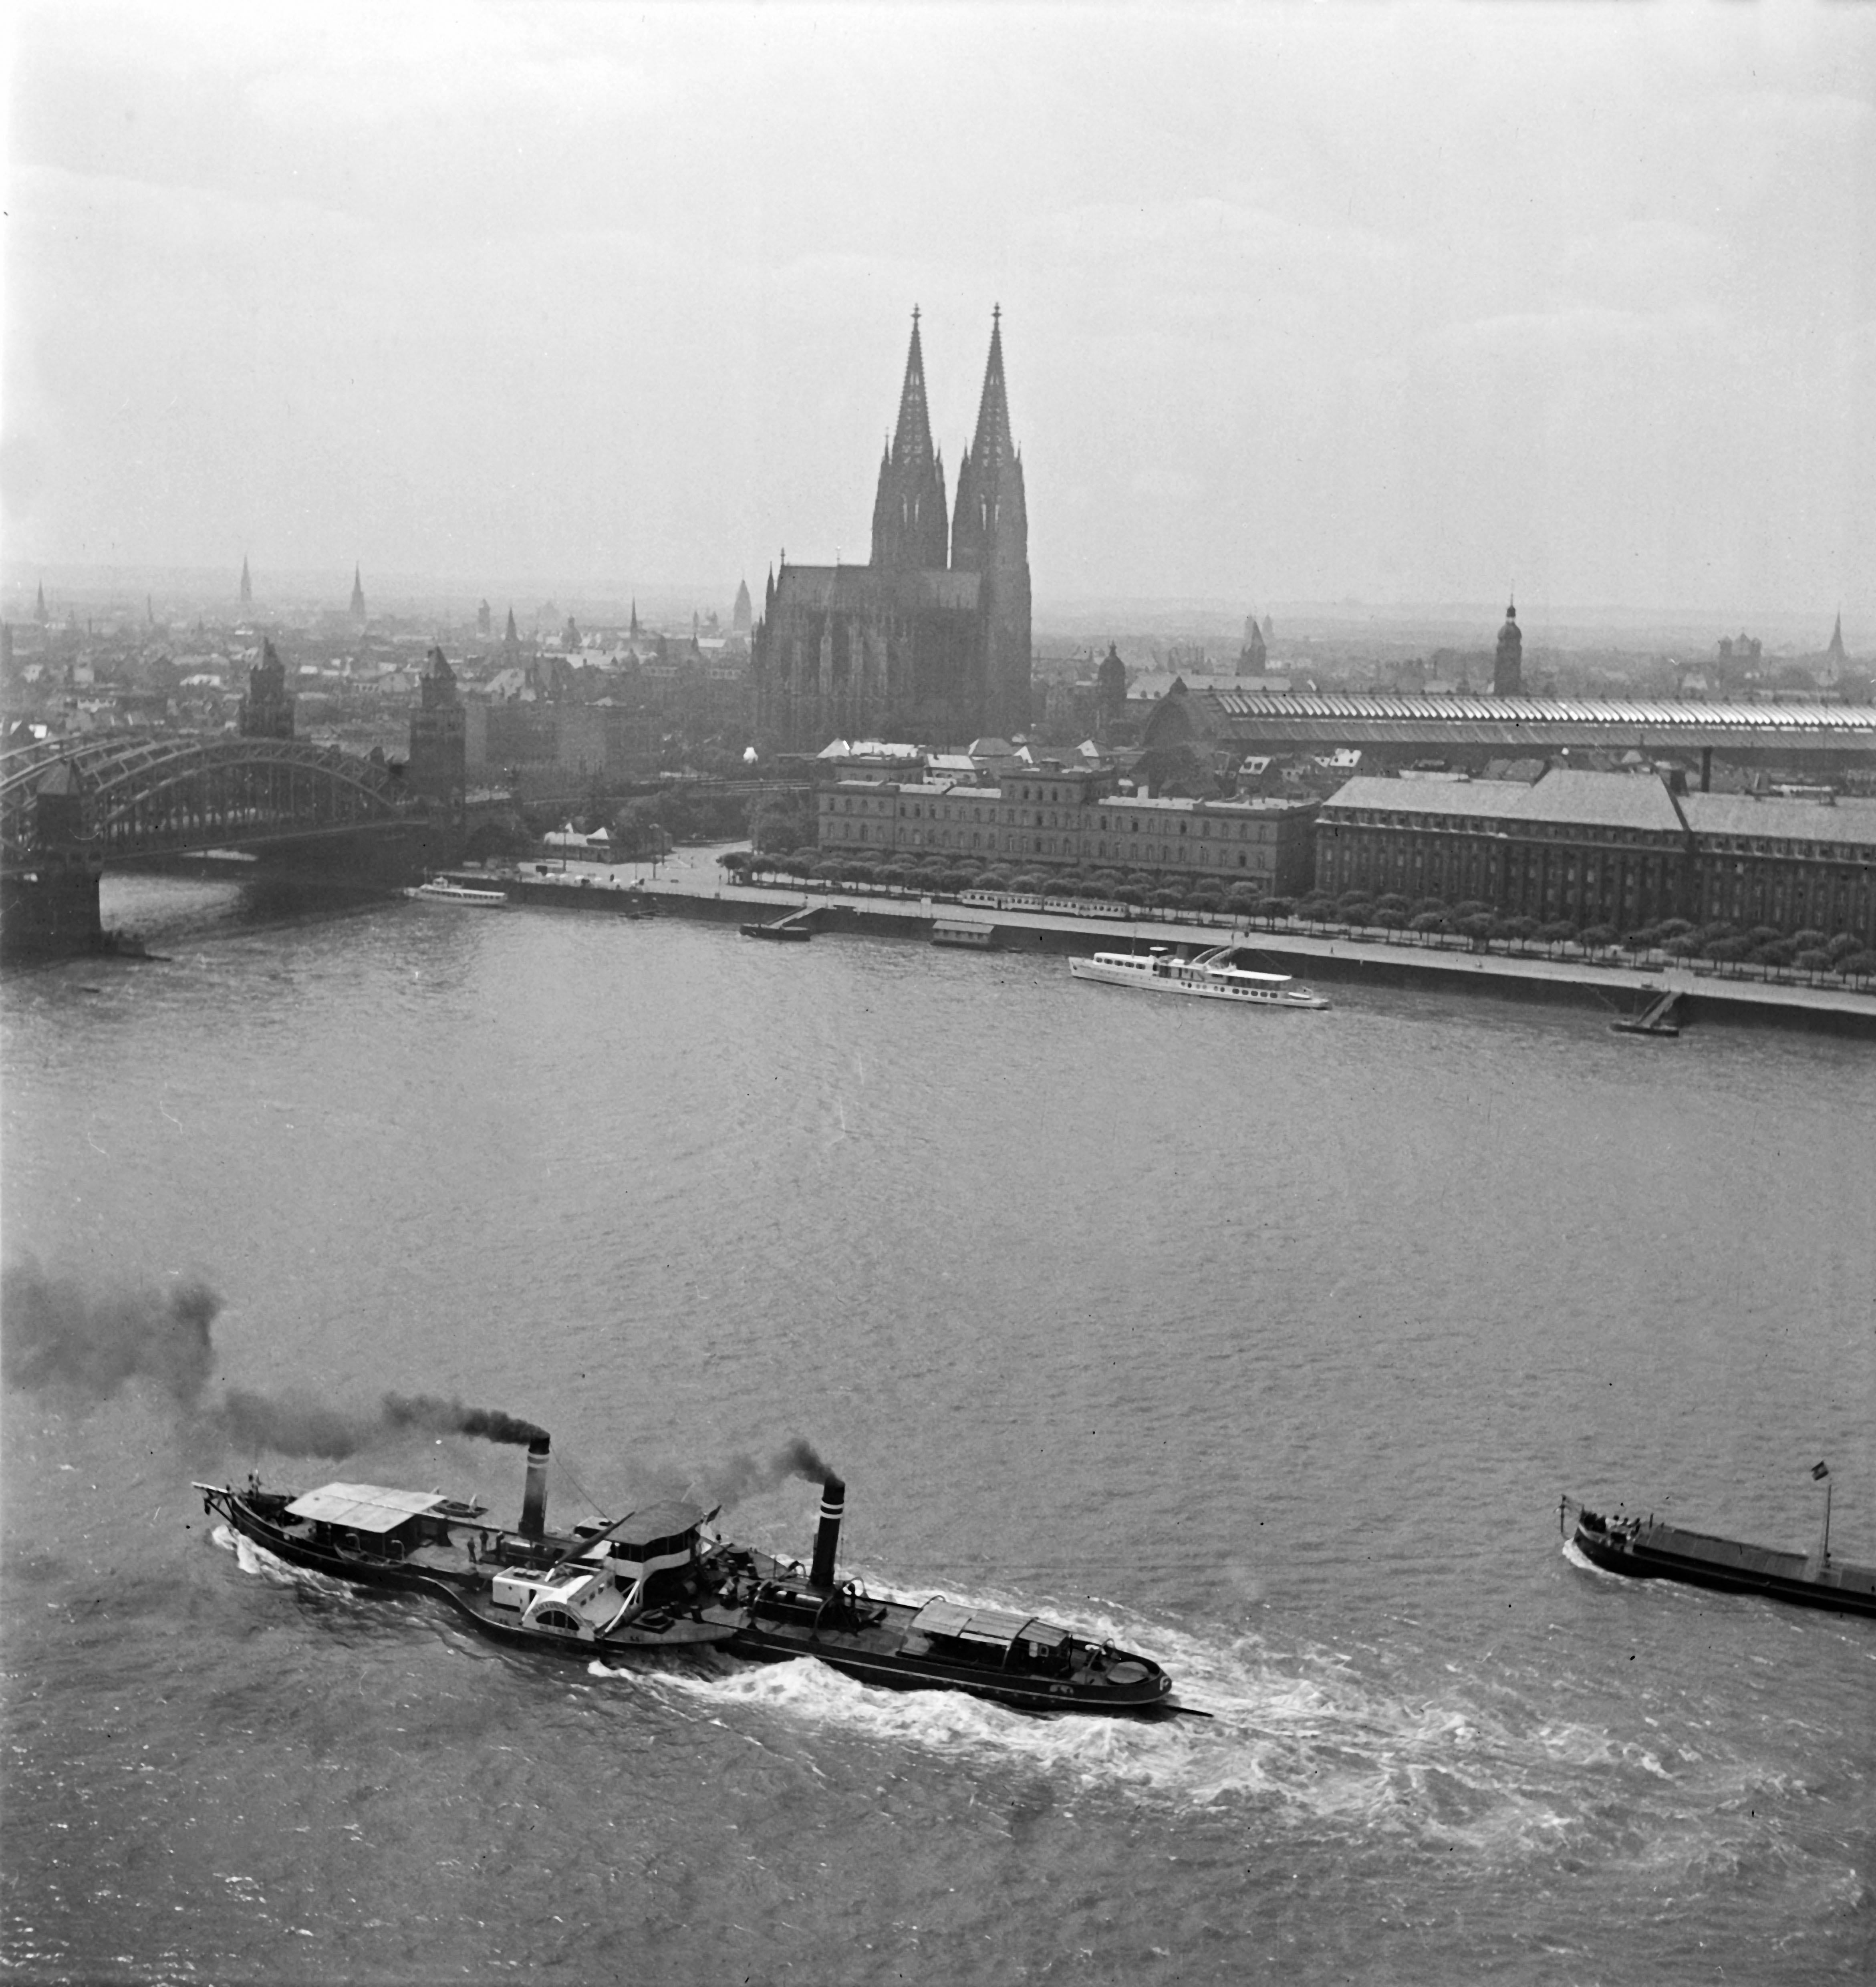 Cologne, Germany 1935, Printed Later